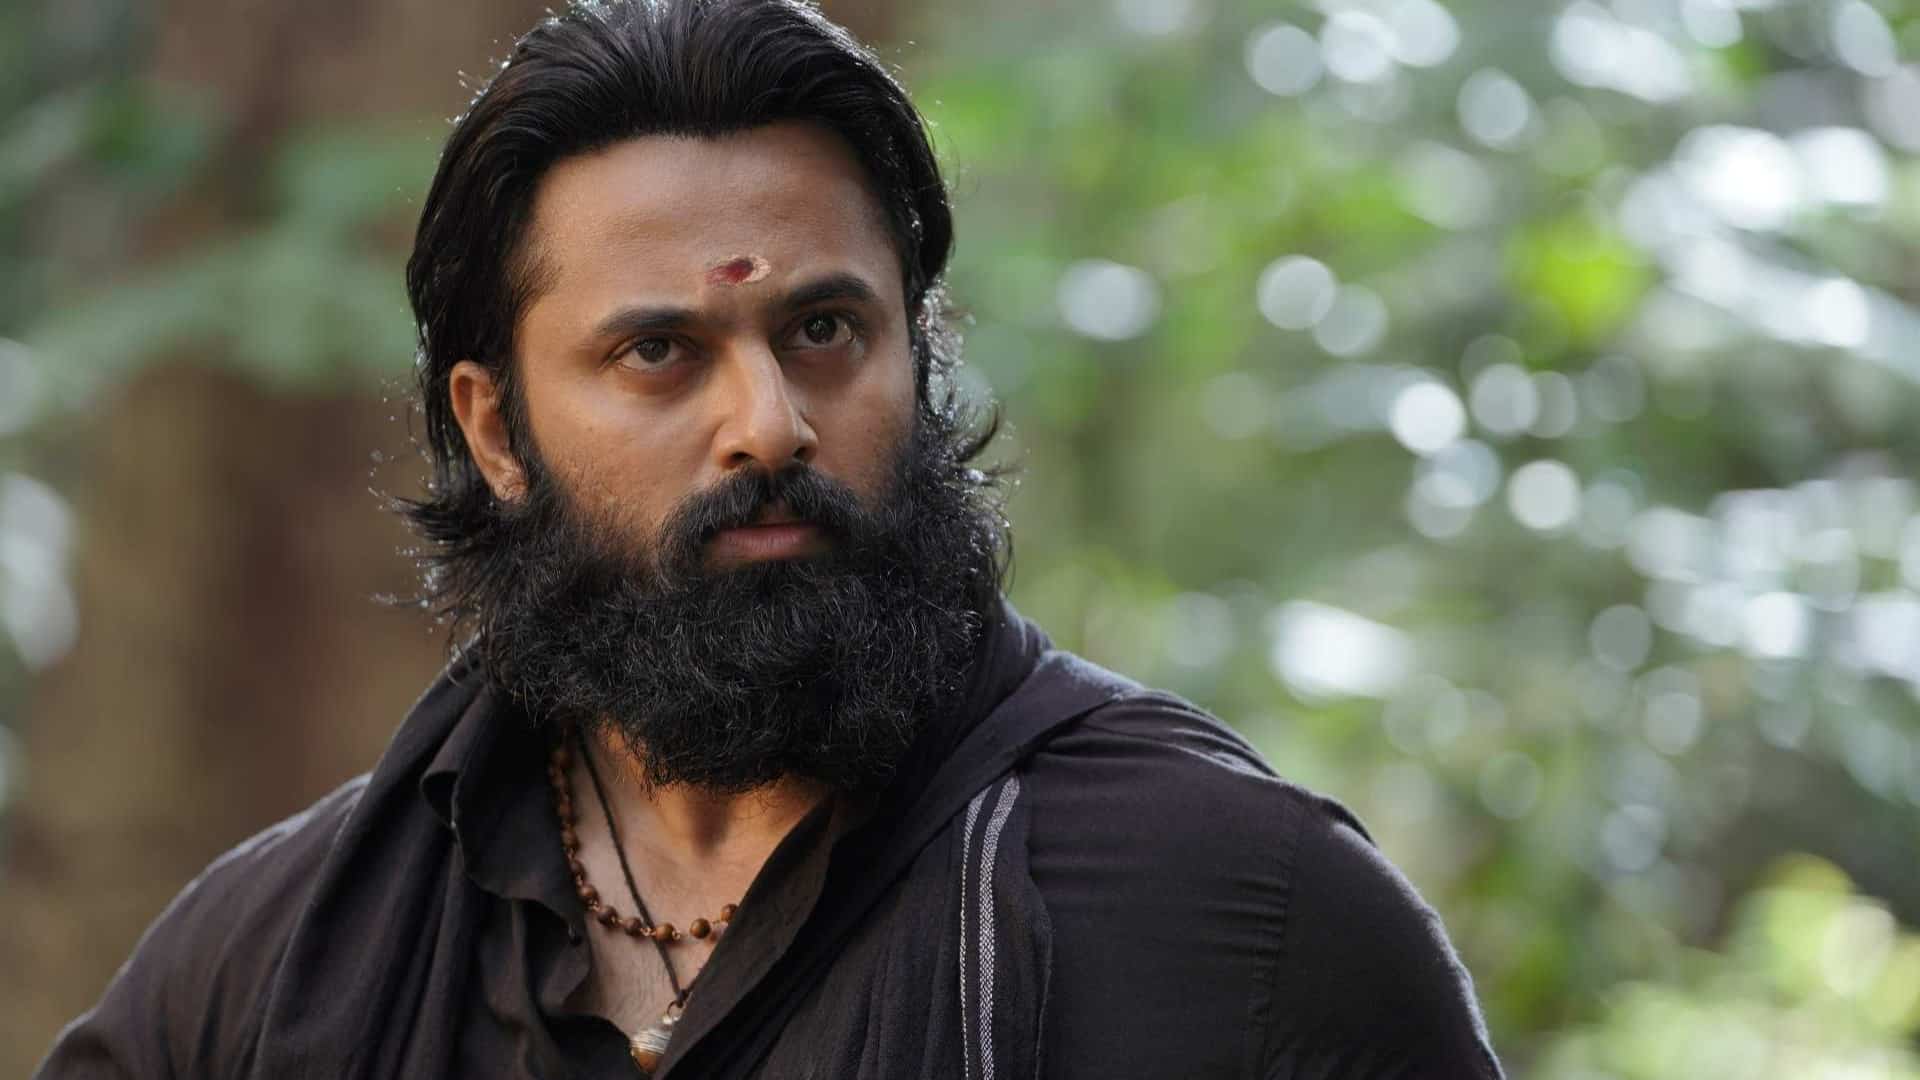 Unni Mukundan: I'm not a propagandist, Malikappuram worked as it was accepted by people of all religions | Exclusive